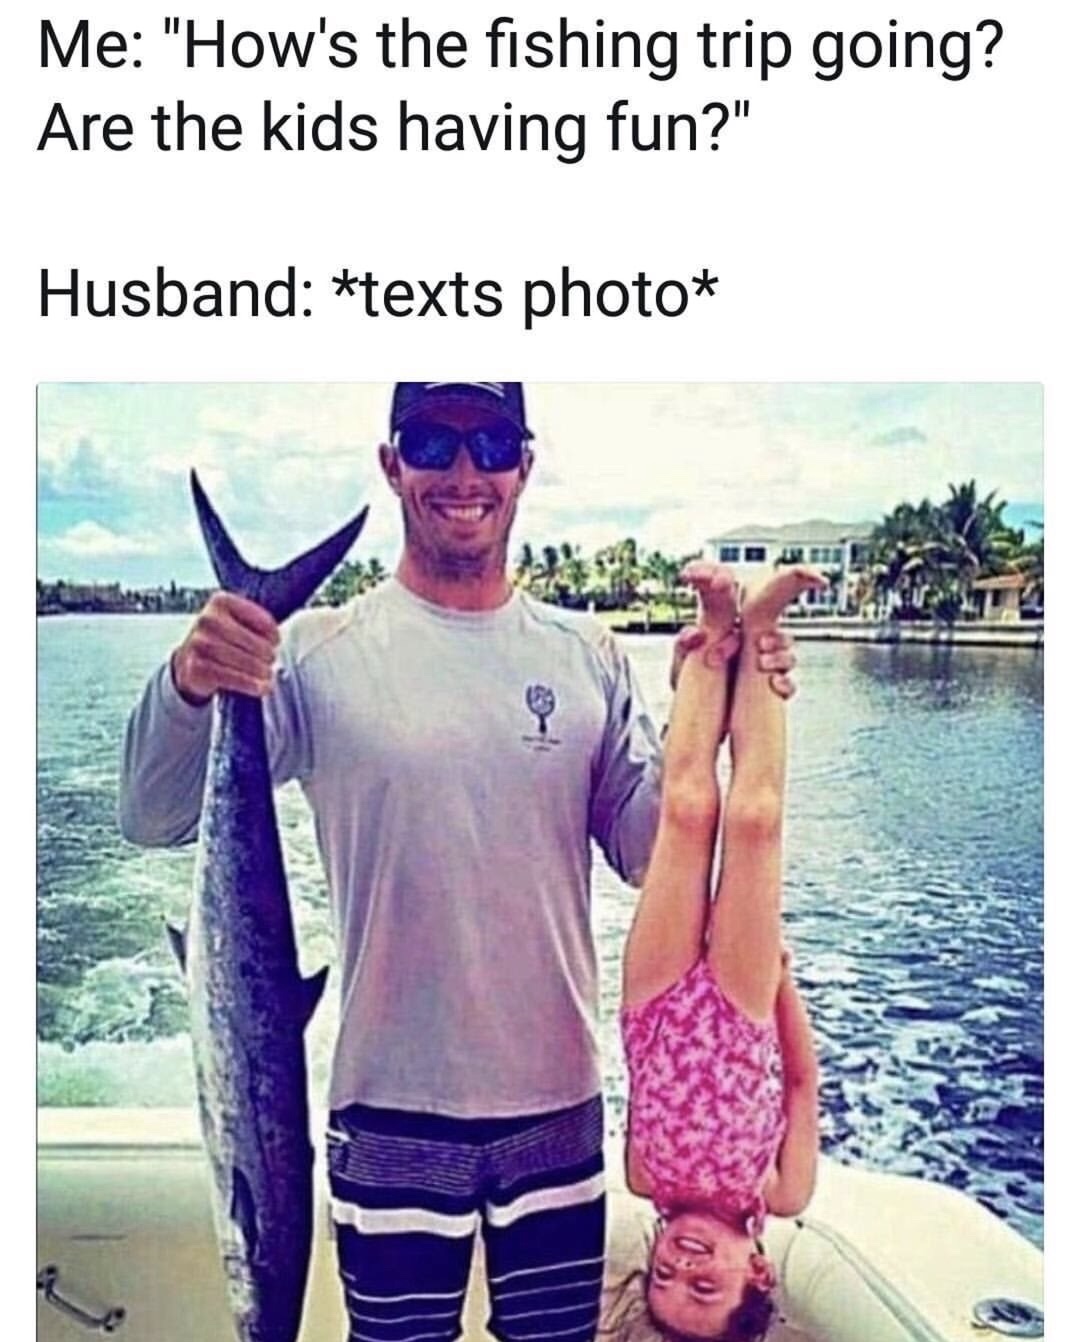 kids fishing funny - Me "How's the fishing trip going? Are the kids having fun?" Husband texts photo